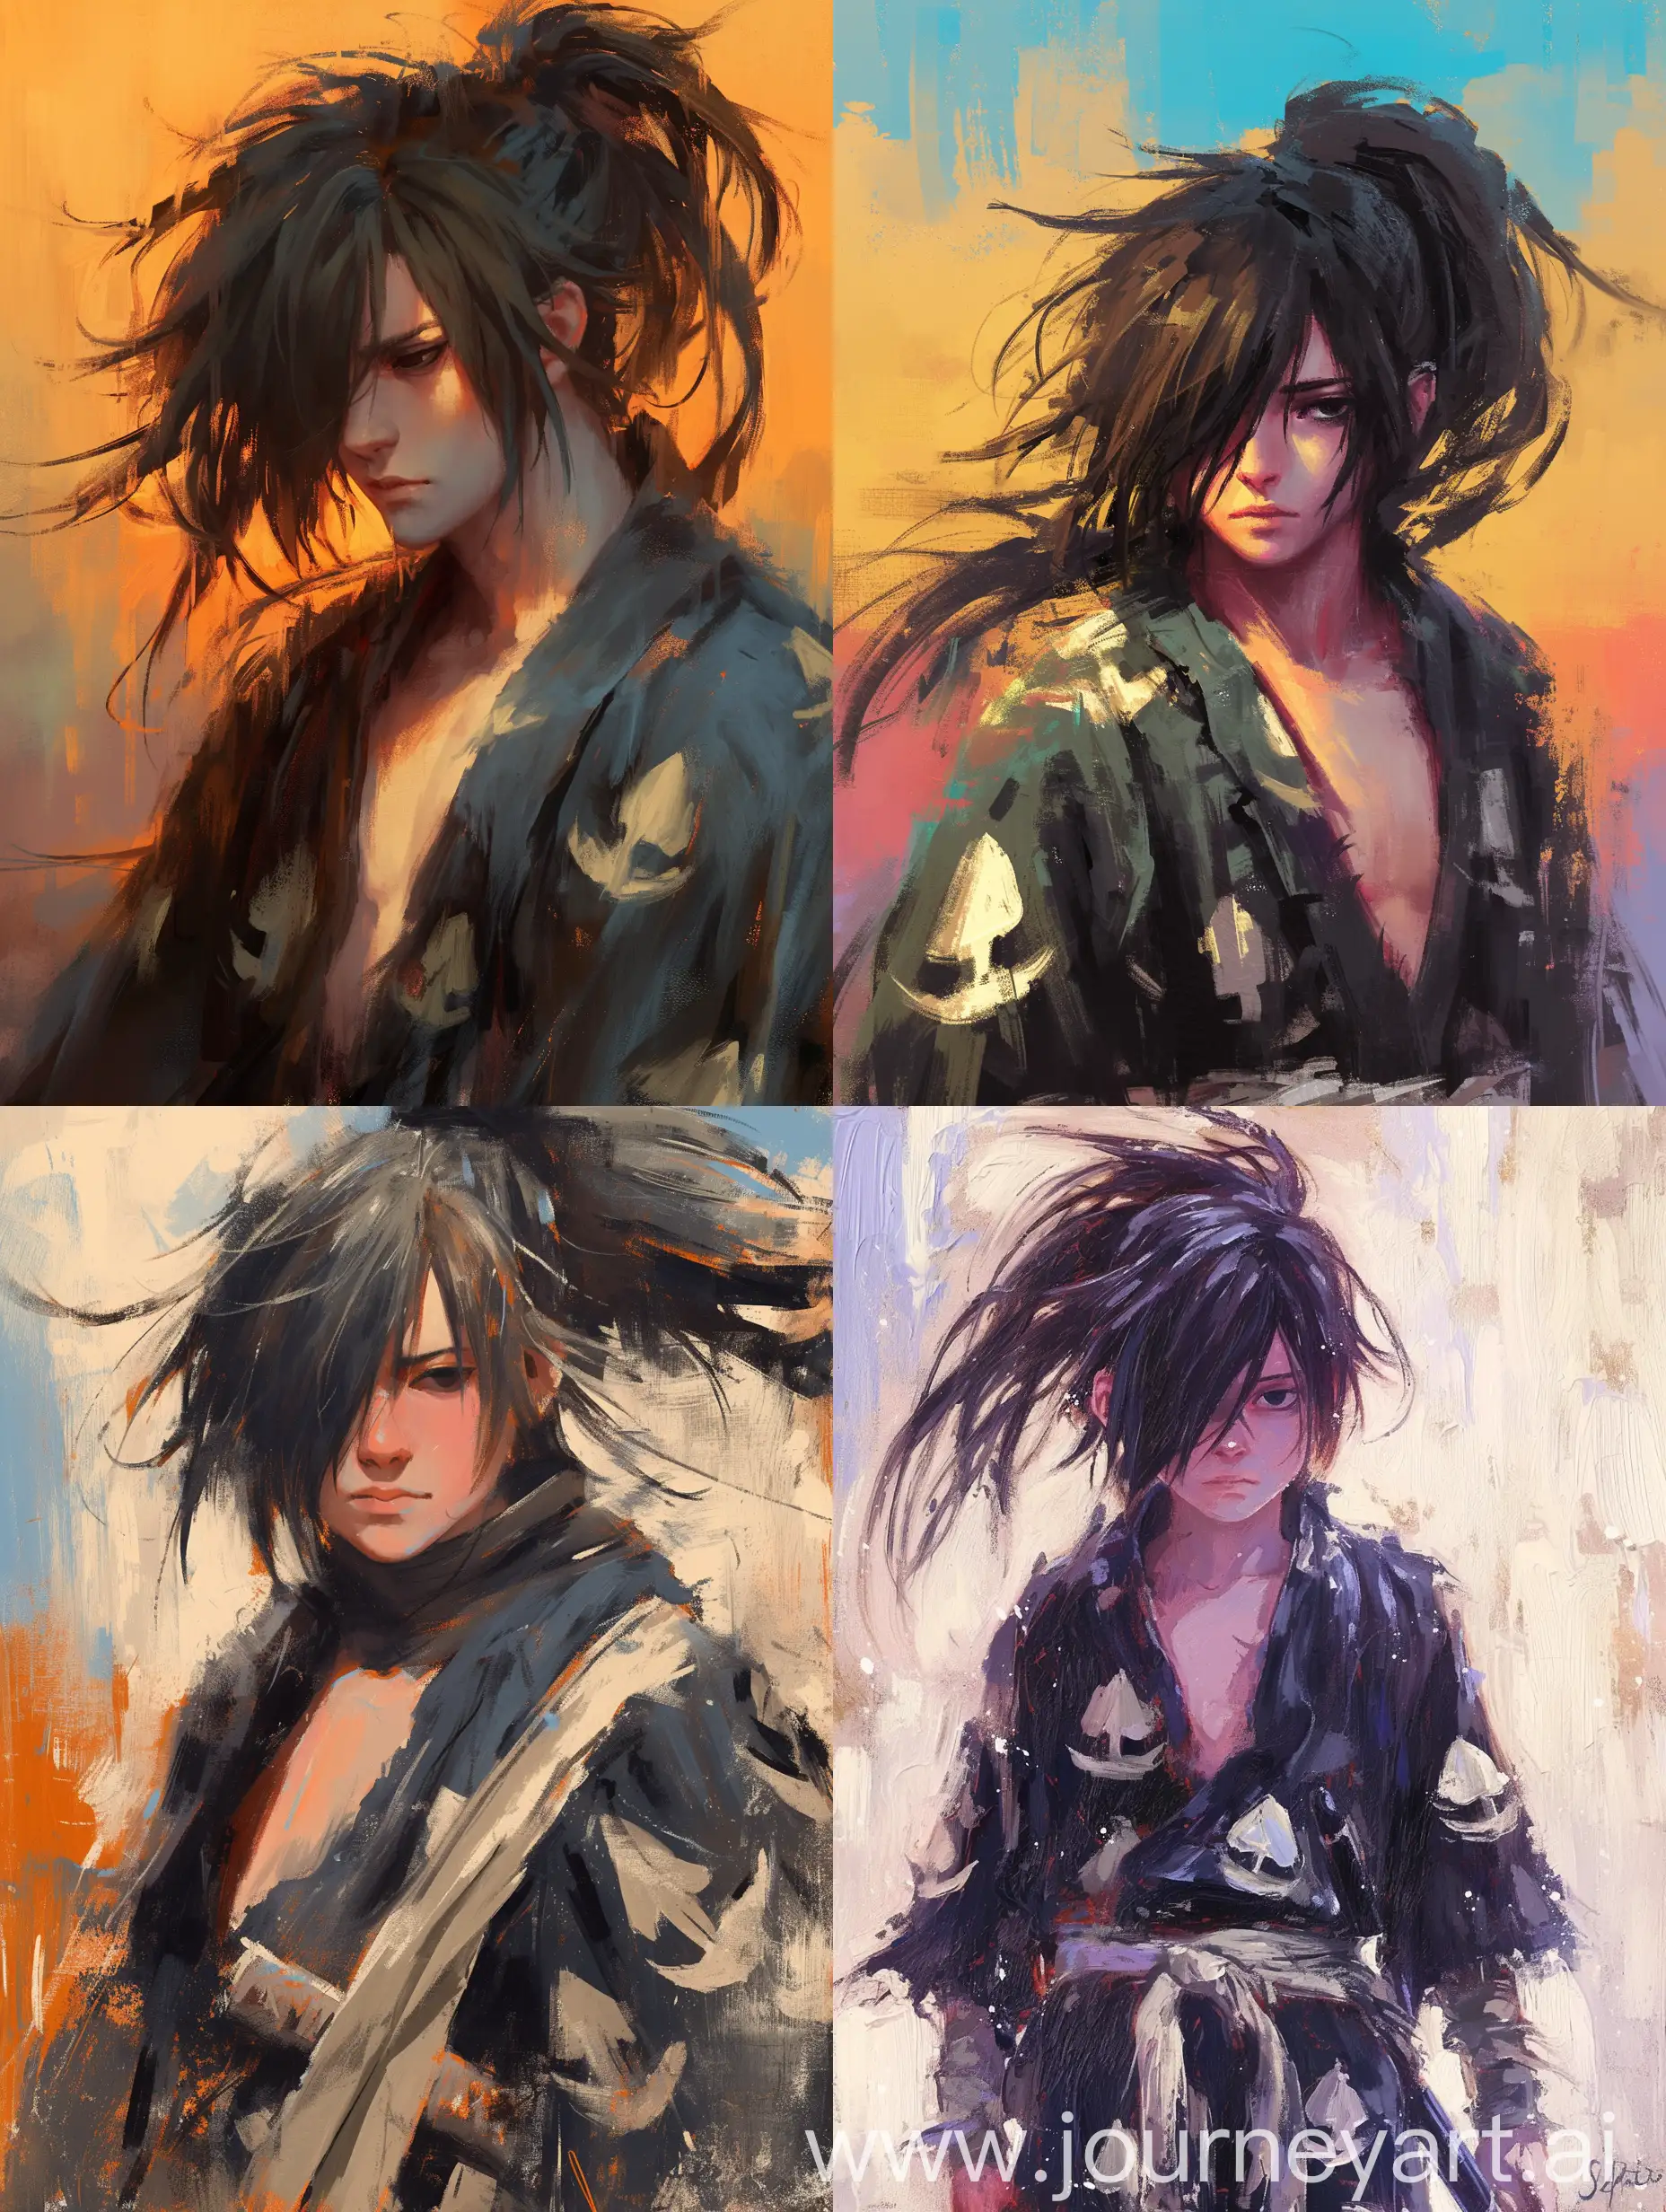 Vibrant-Oil-Painting-of-Hyakkimaru-from-Dororo-Saturated-Color-Digital-Art